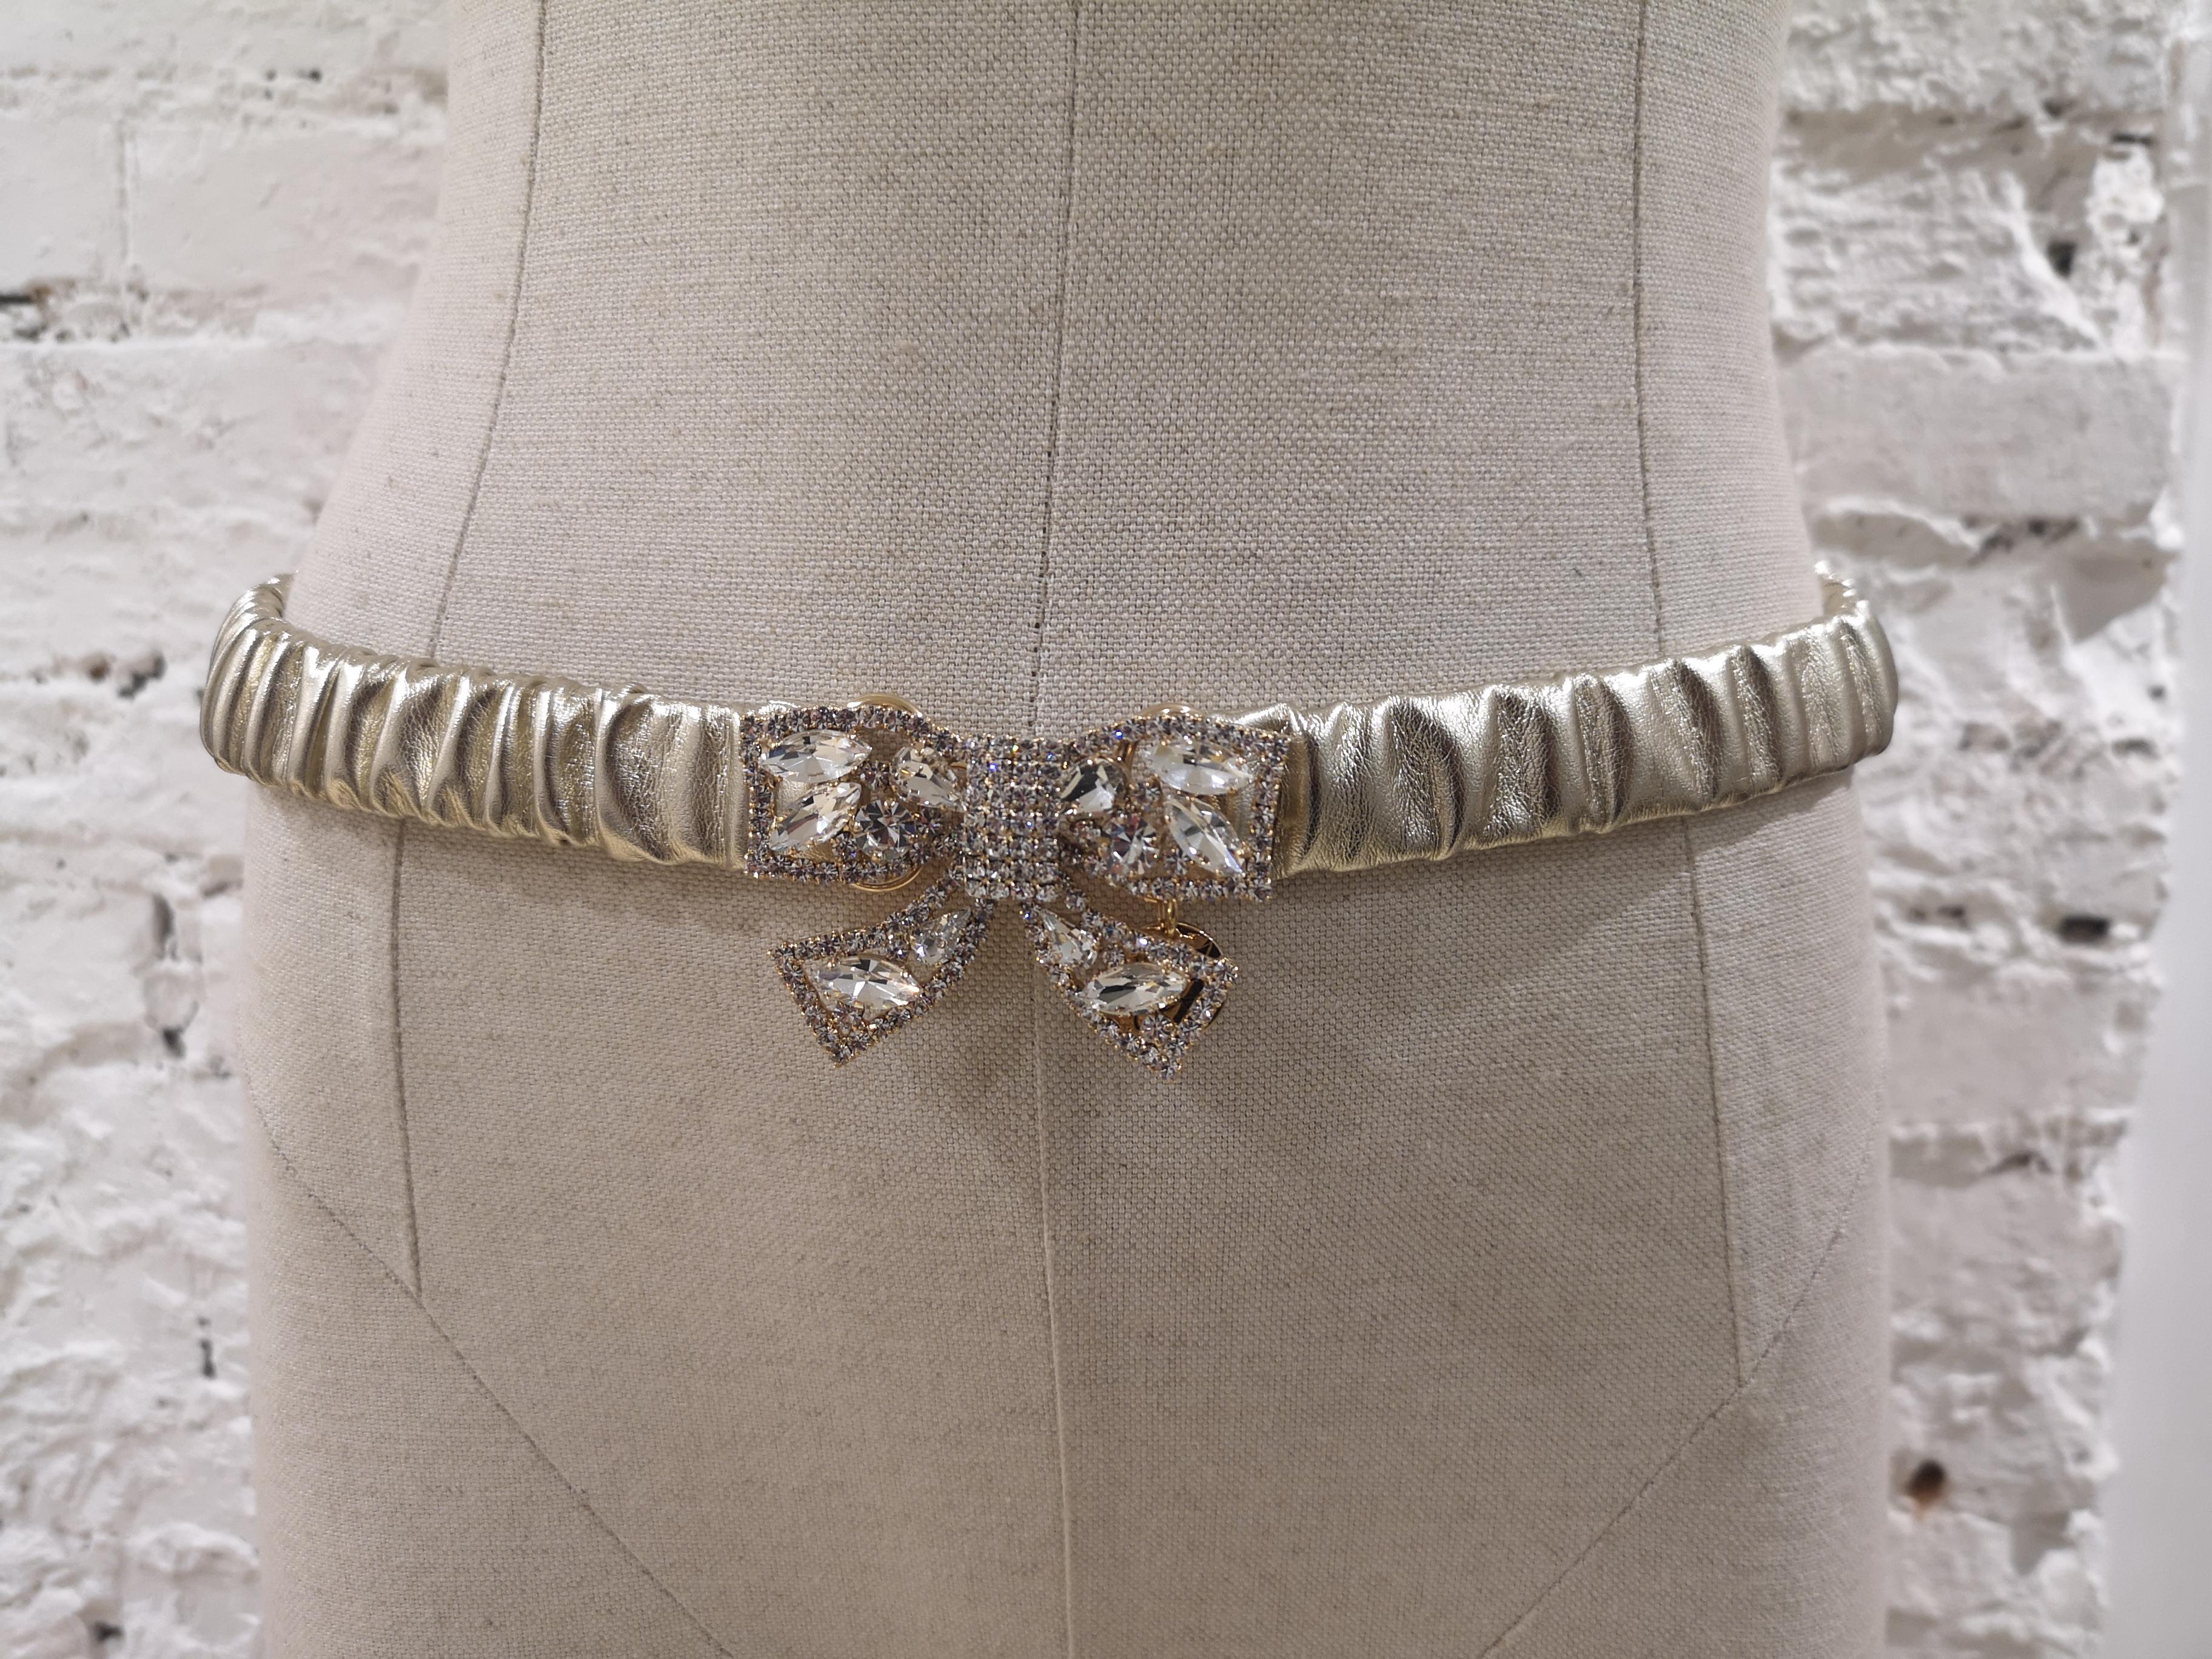 Gold leather swarovski bow belt
totally made in italy
one size